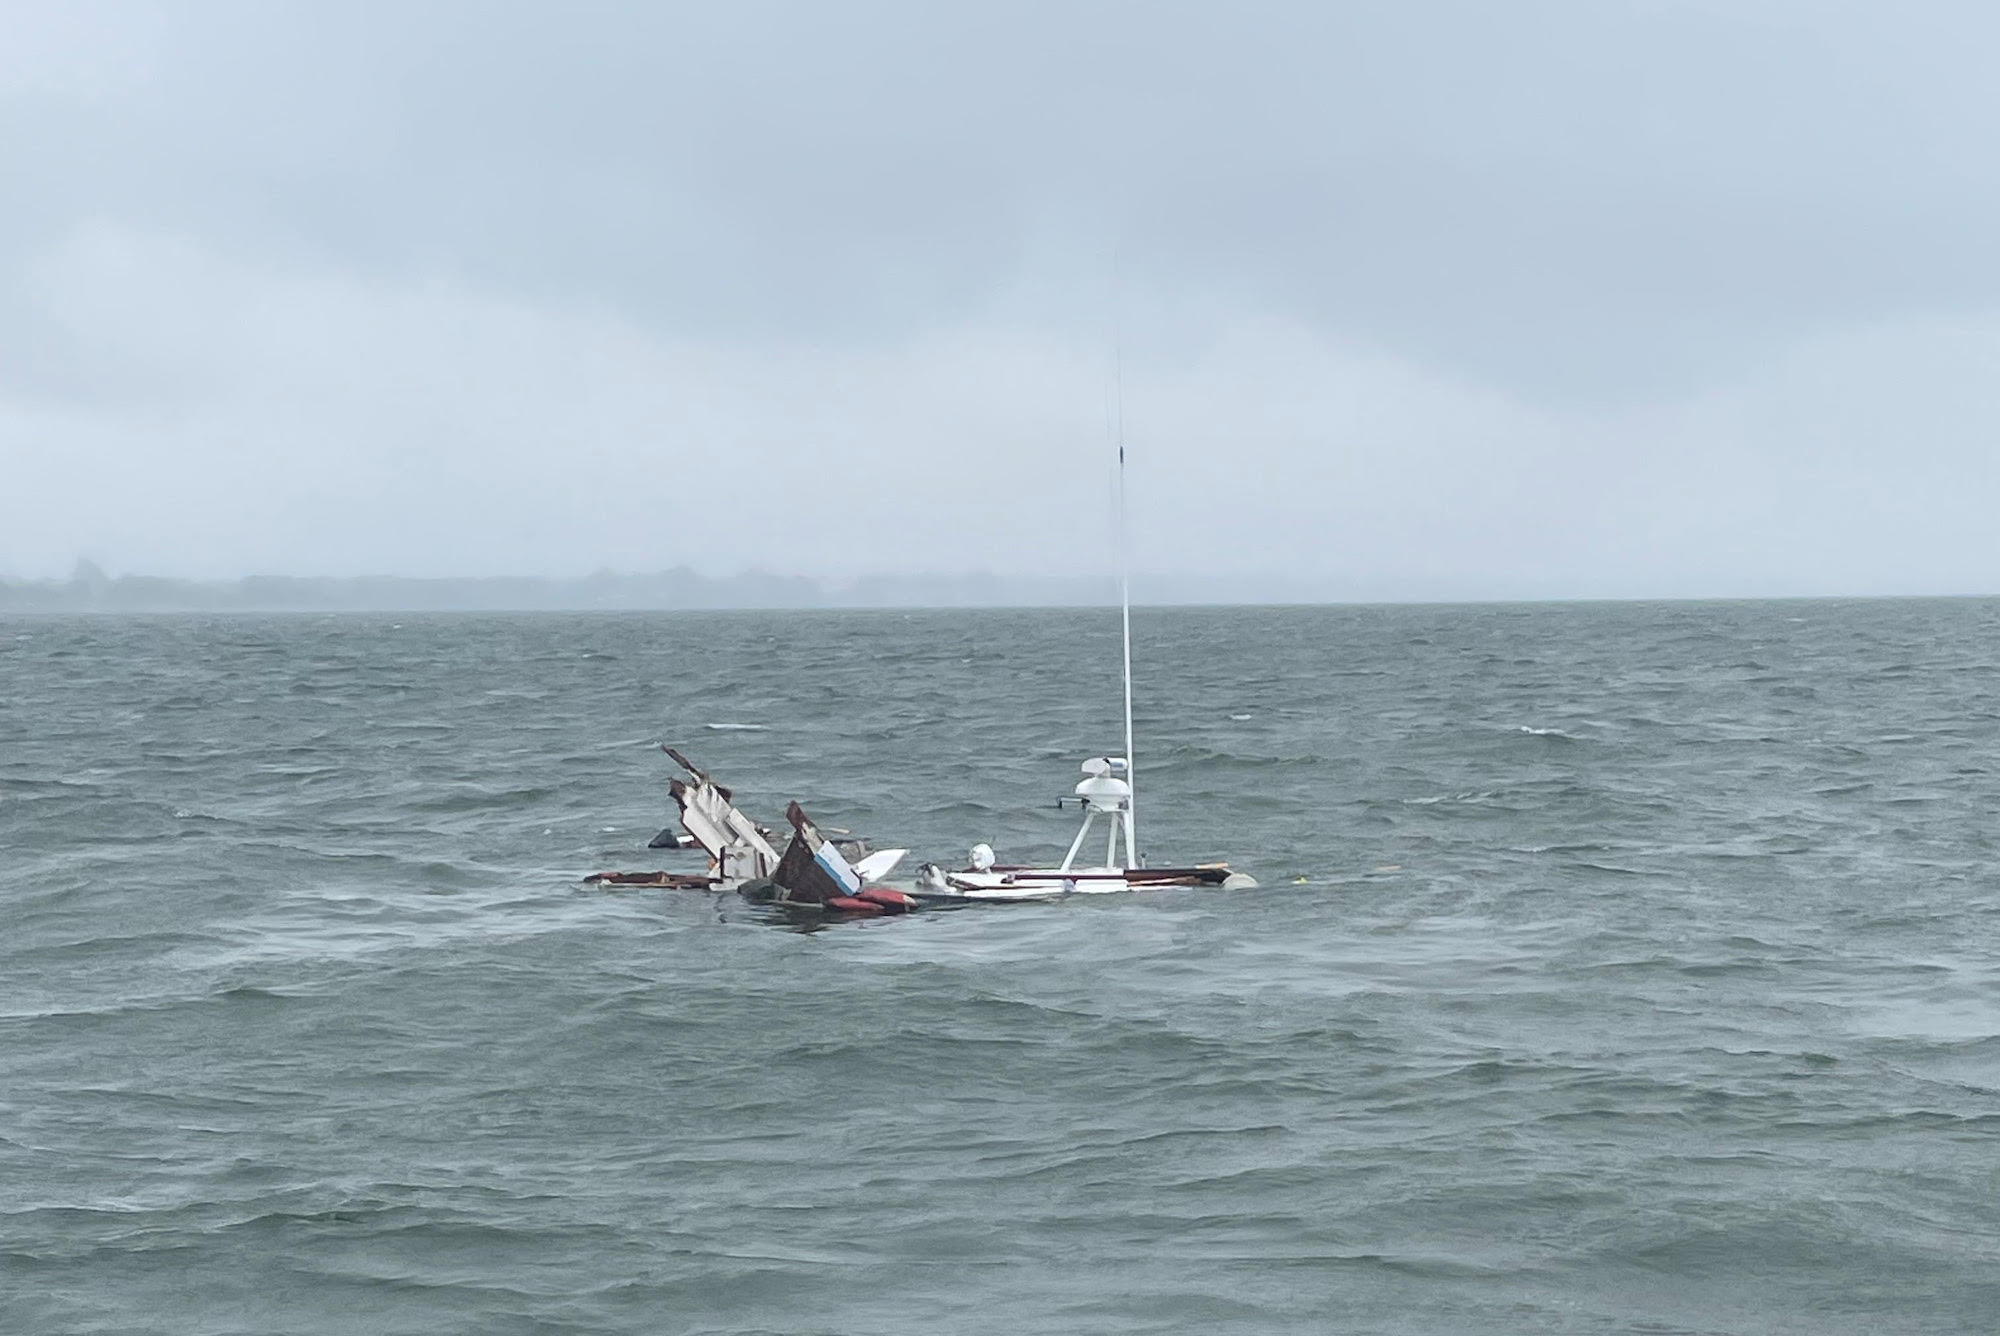 Fishing Vessel Sinks After Collision with Virginia Pilot Boat